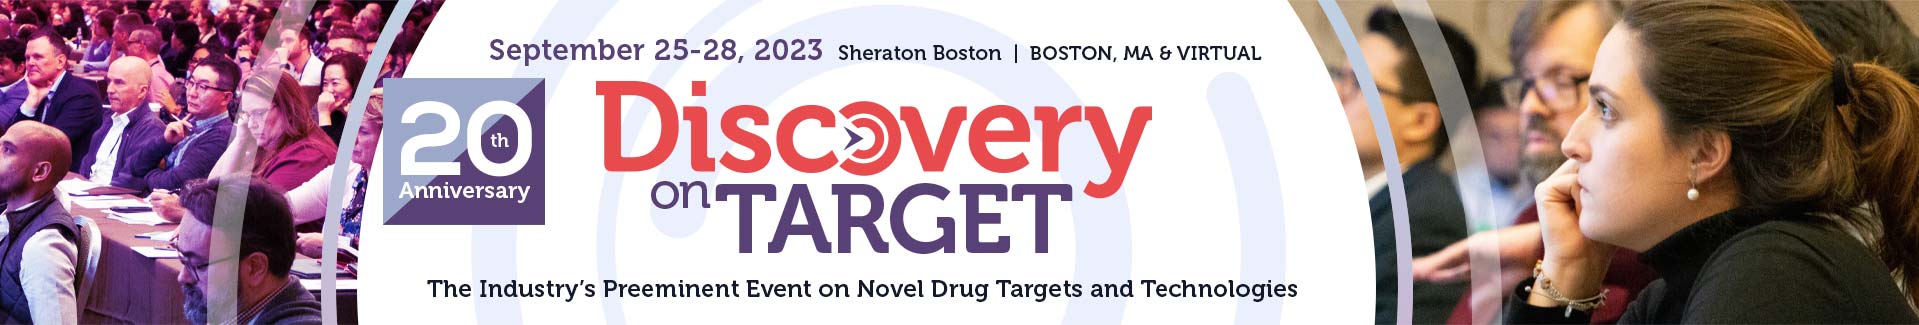 Discovery on Target - The Industry's Preeminent Event on Novel Drug Targets & Technologies, Boston, Massachusetts, United States